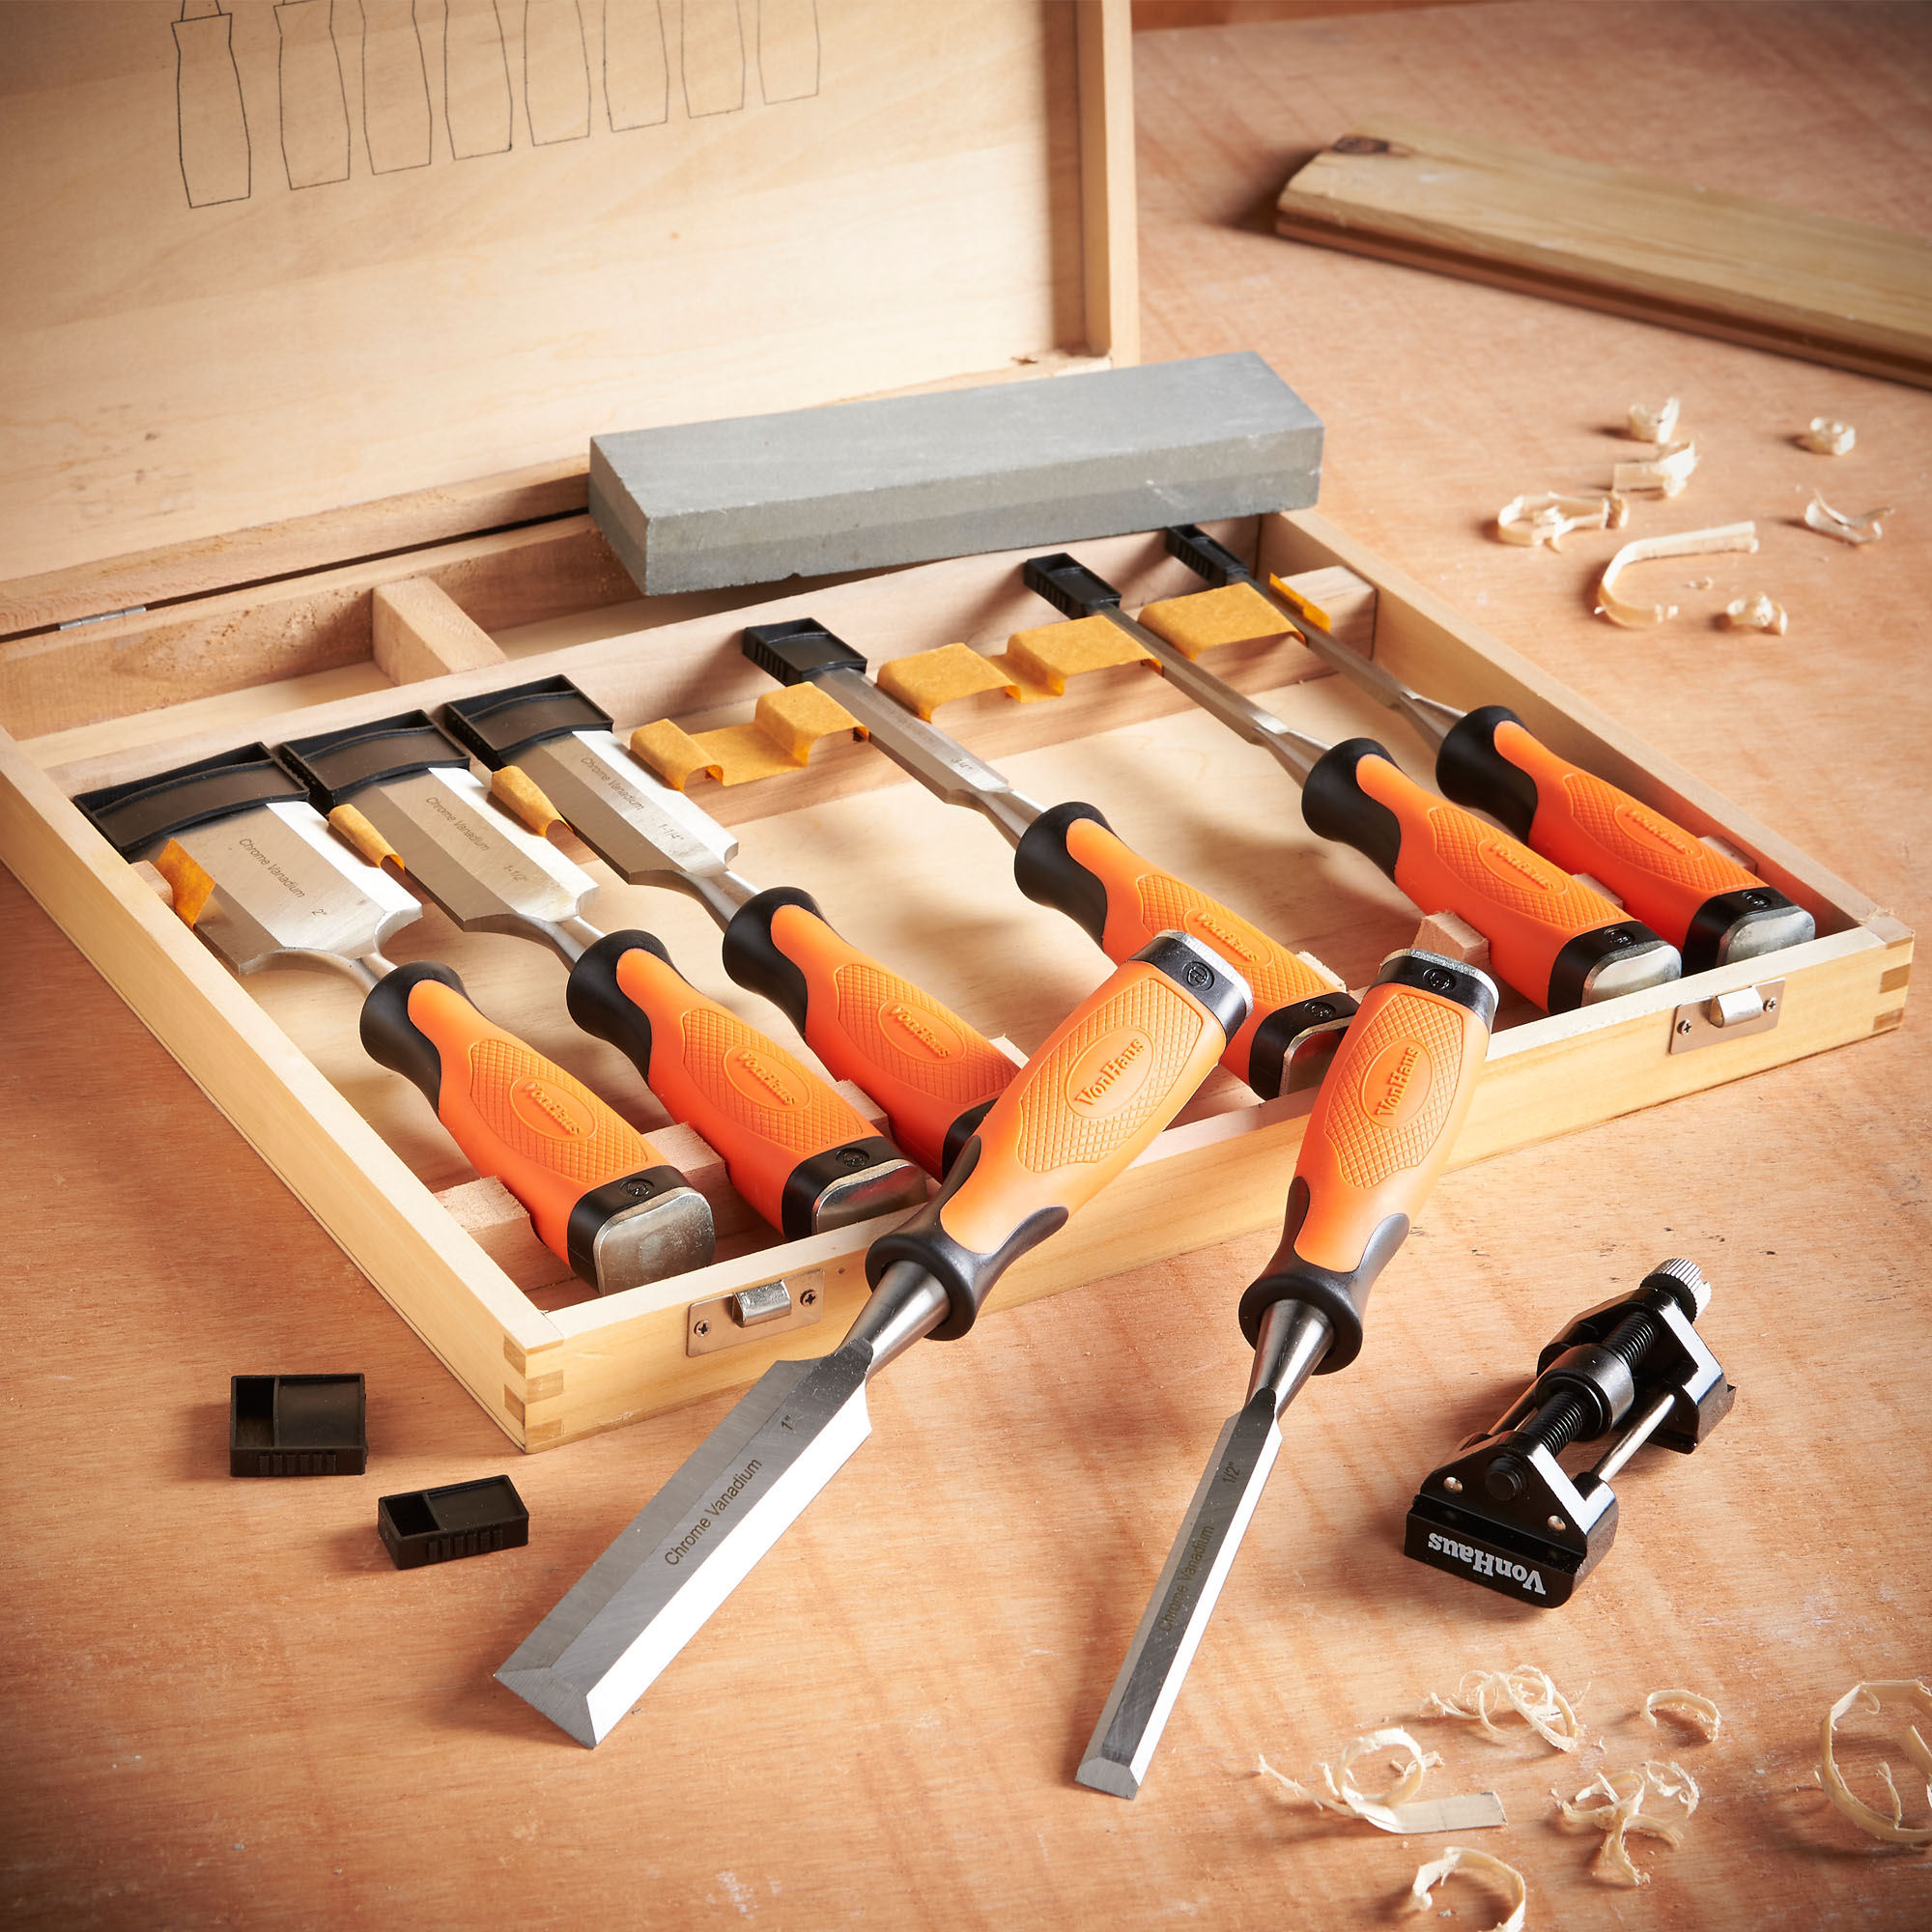 VonHaus 10 Piece Wood Working Chisel Set with Honing Guide 